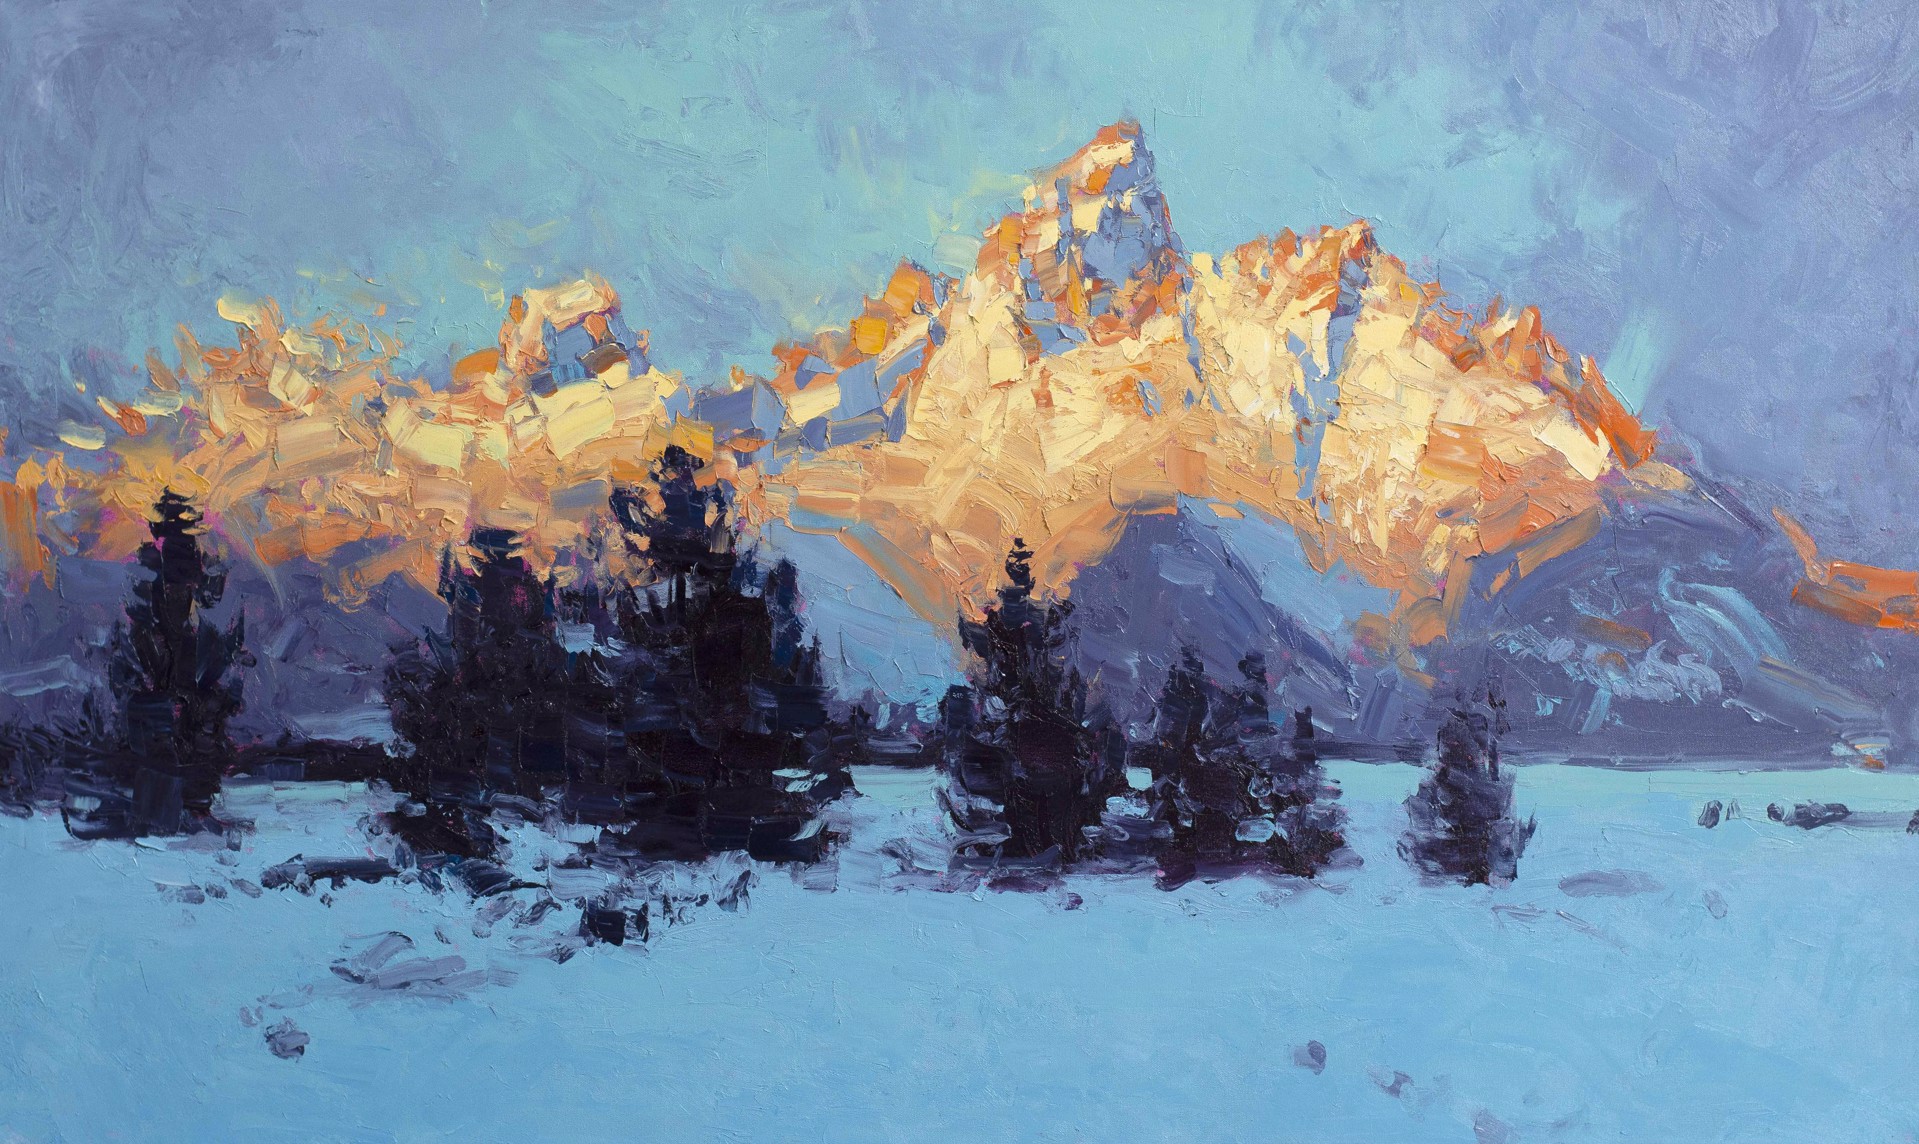 Original Oil Painting By Silas Thompson Of Tetons In The Winter